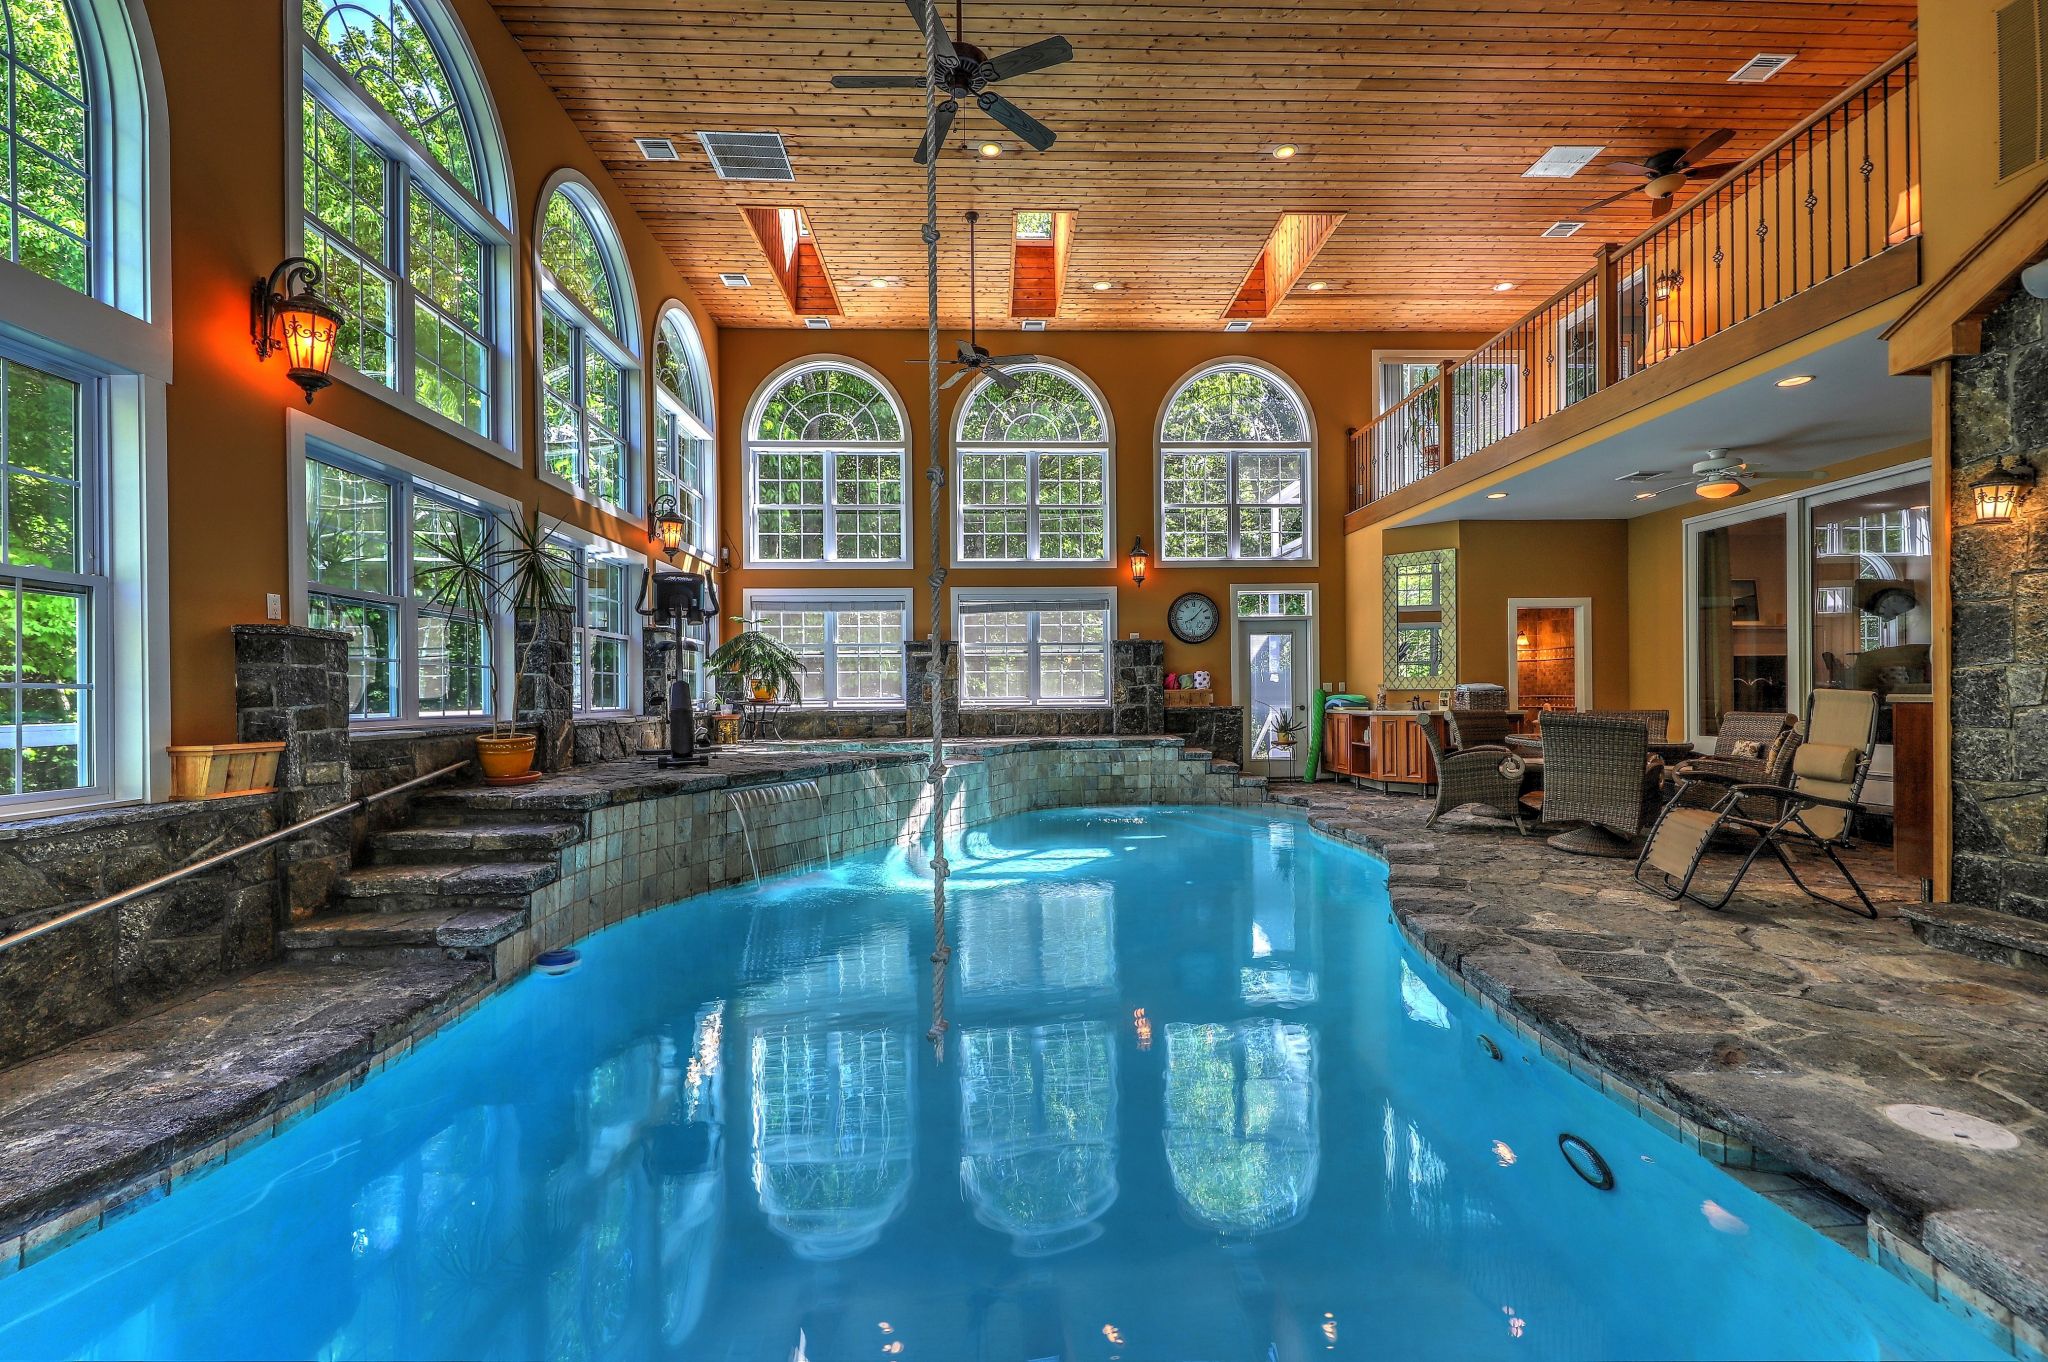 On the market: Shelton house with indoor pool, hiking trails